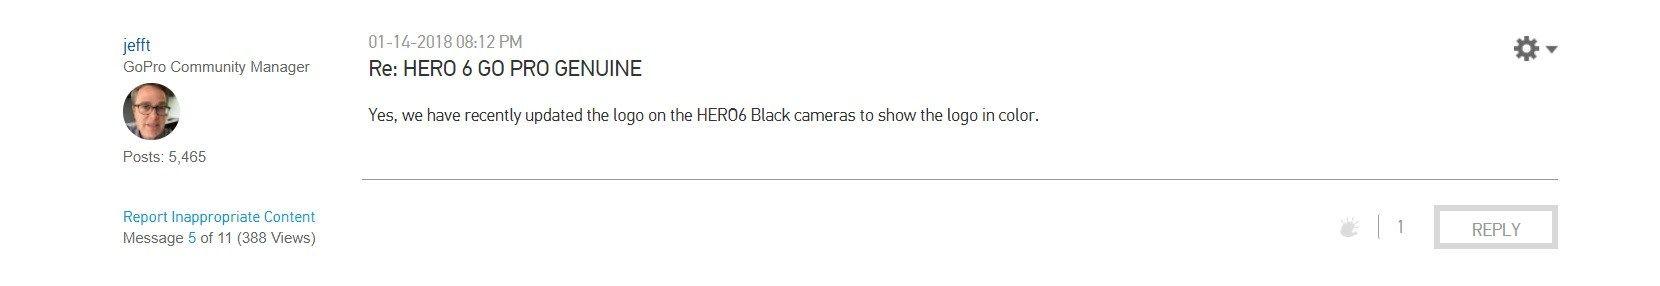 Grey Colored Logo - GoPro HERO6 Colored and Gray Logo - What's the Difference?